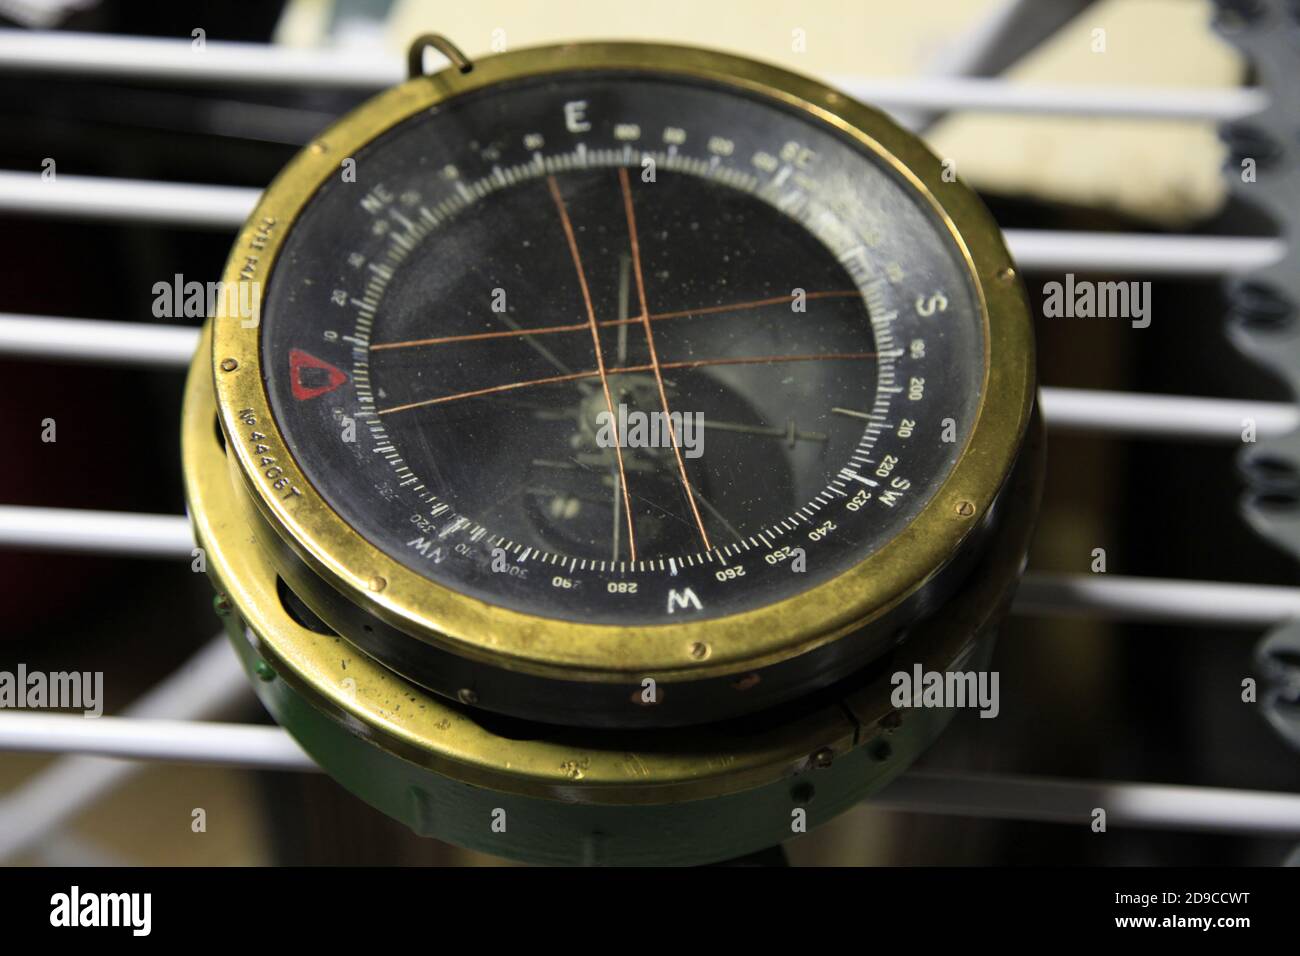 RAF P4A aircraft compass from the wartime. Used in Lancaster, Wellington, Sterling and other big bombers. Stock Photo